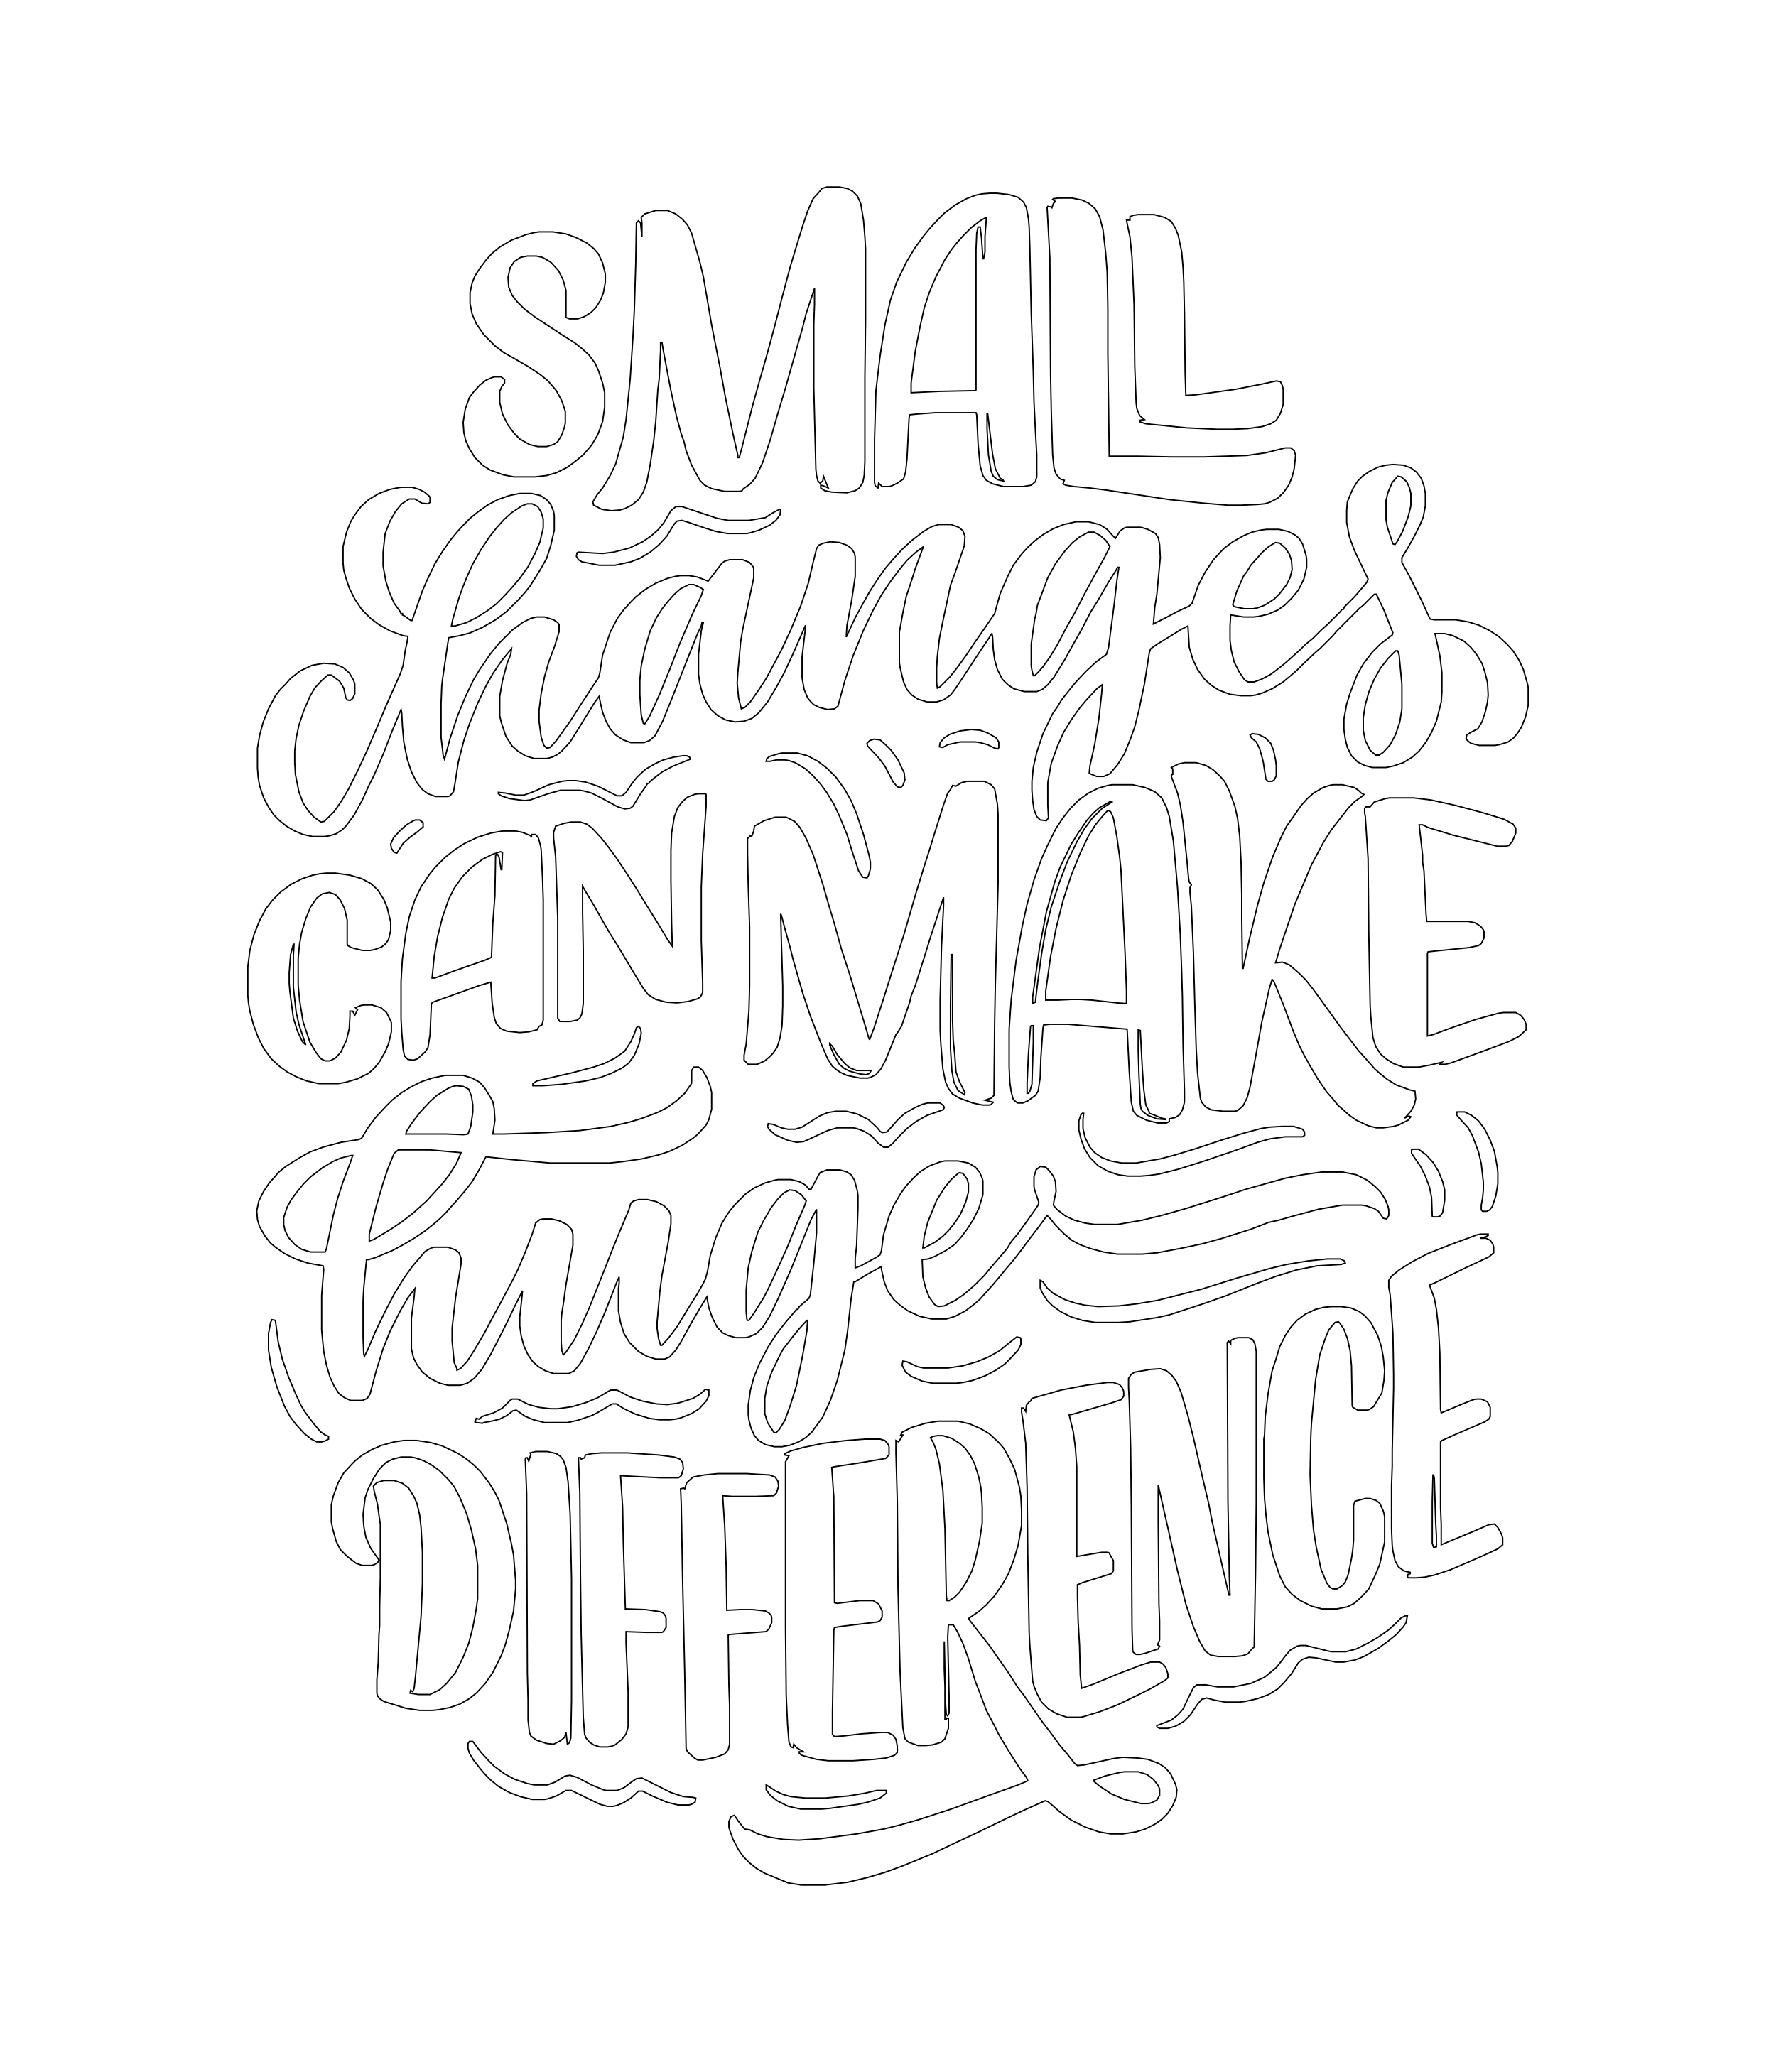 Small Changes Can Make Huge Difference - Coloring page